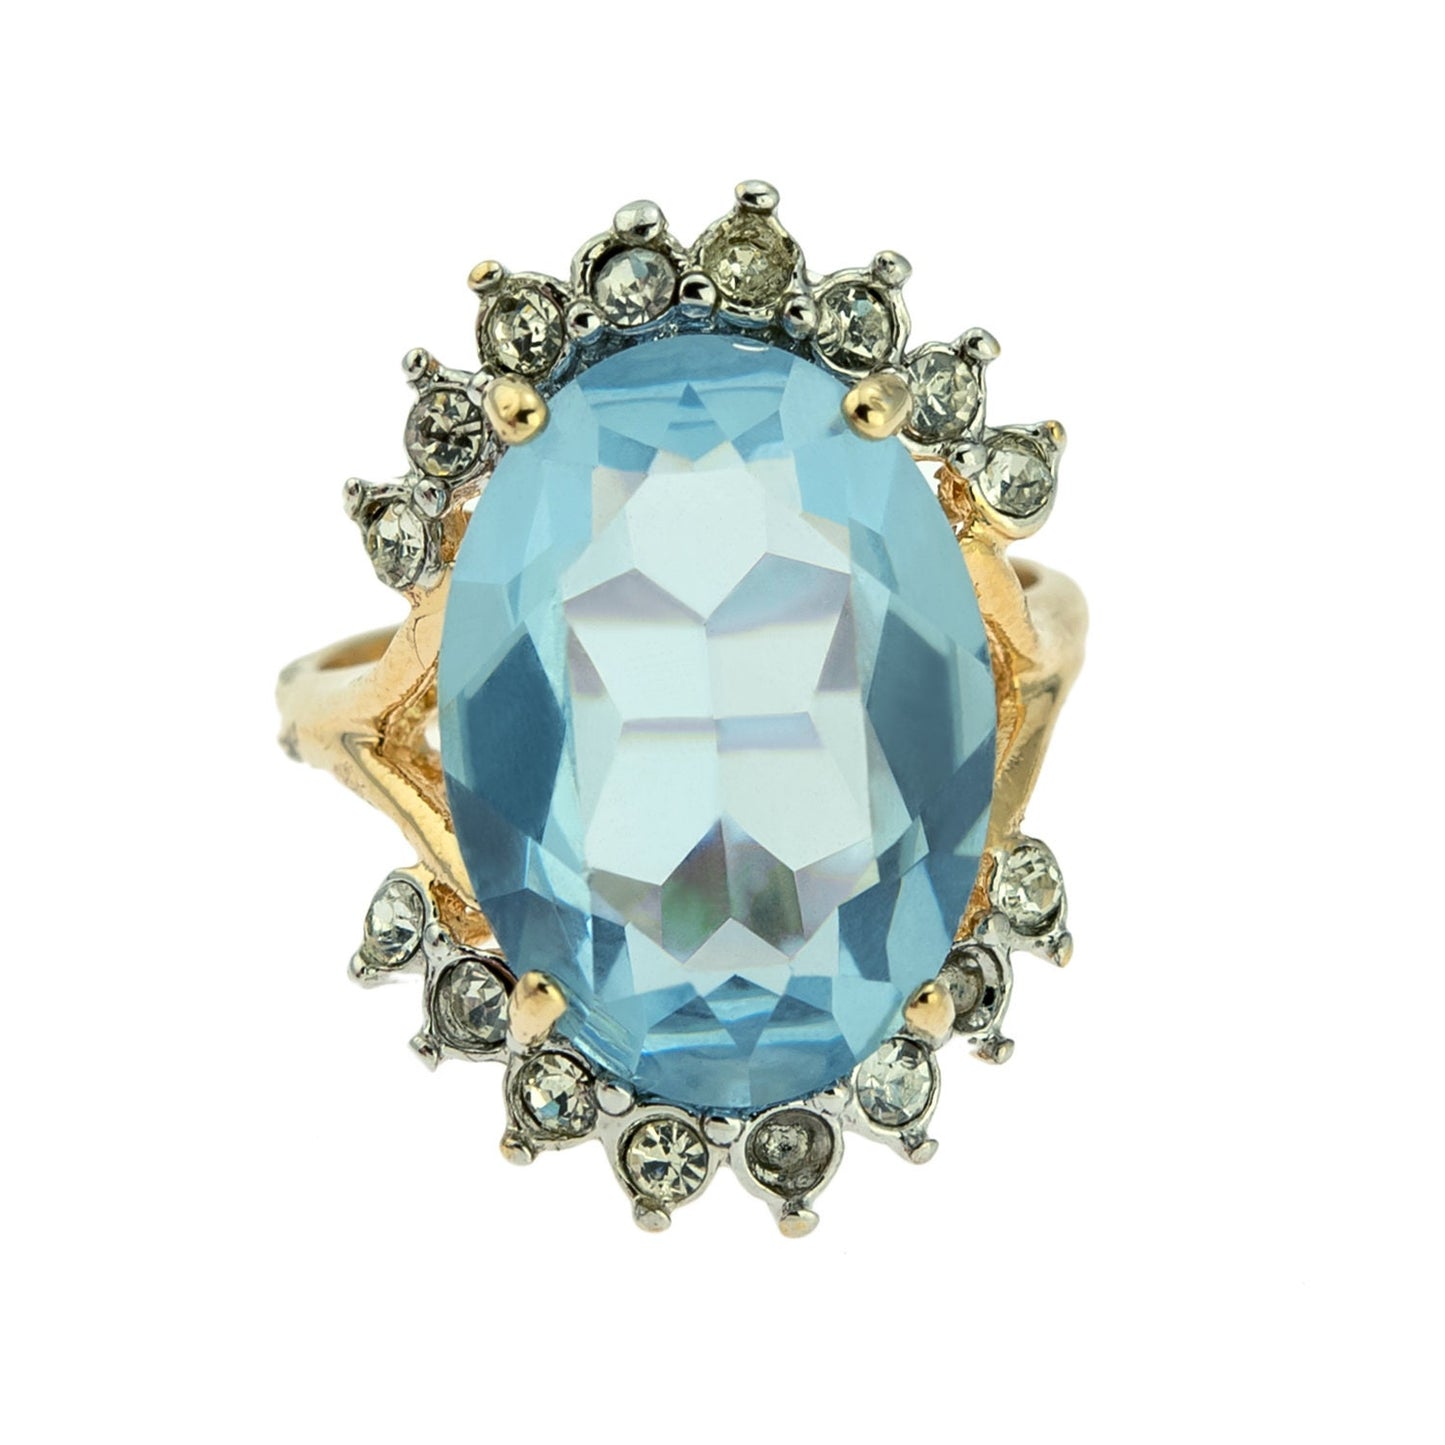 Vintage Ring Aquamarine and Clear Swarovski Crystal Ring 18k Gold Antique Jewelry for Women R1909-AQY - Limited Stock - Never Worn